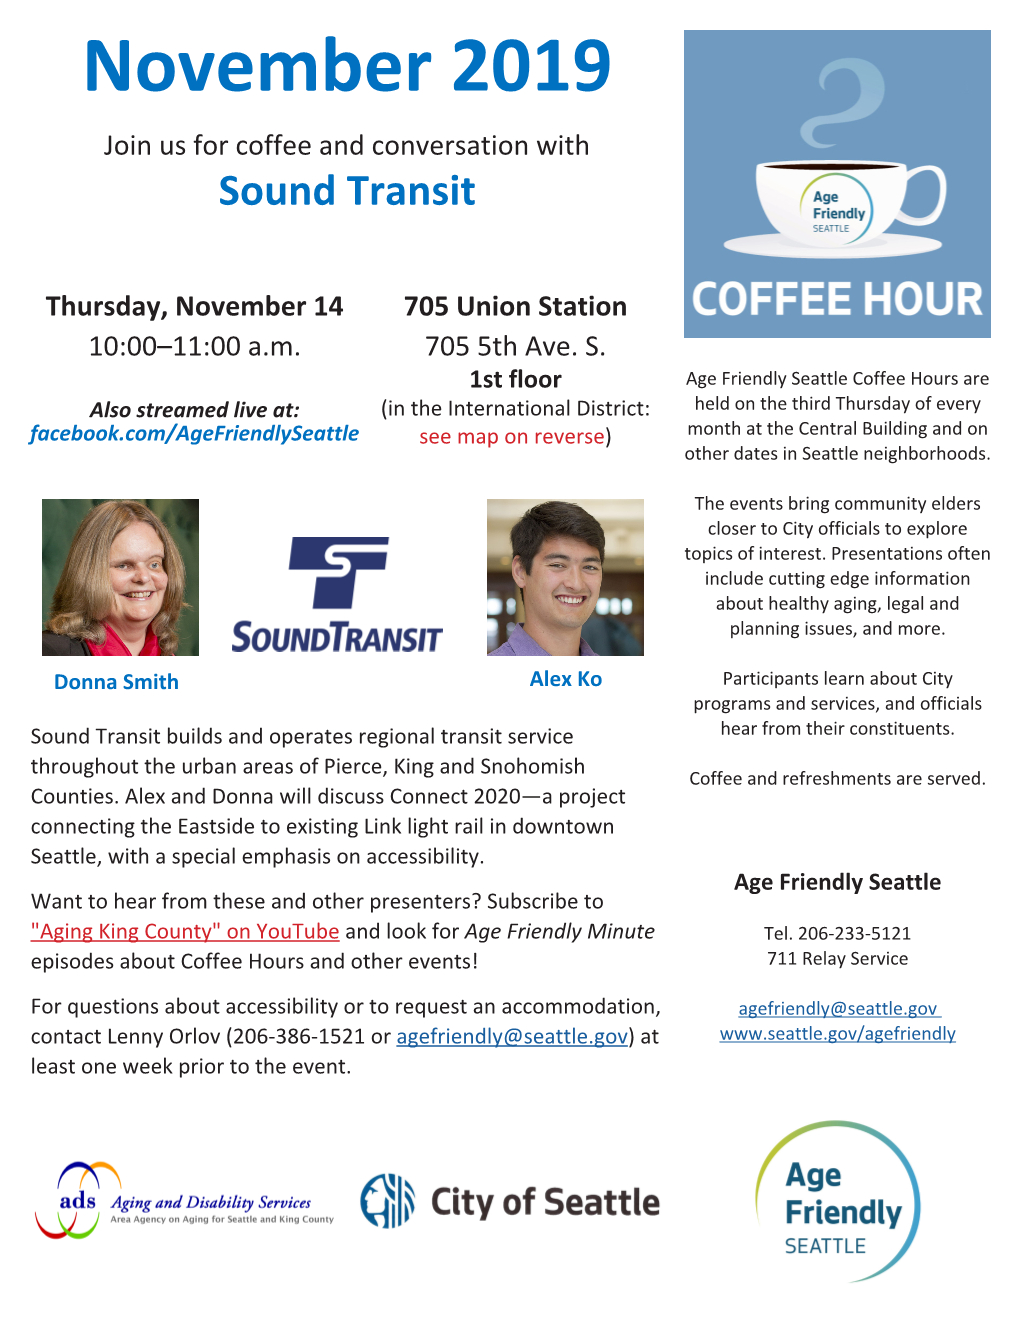 November 2019 Age Friendly Seattle Coffee Hour